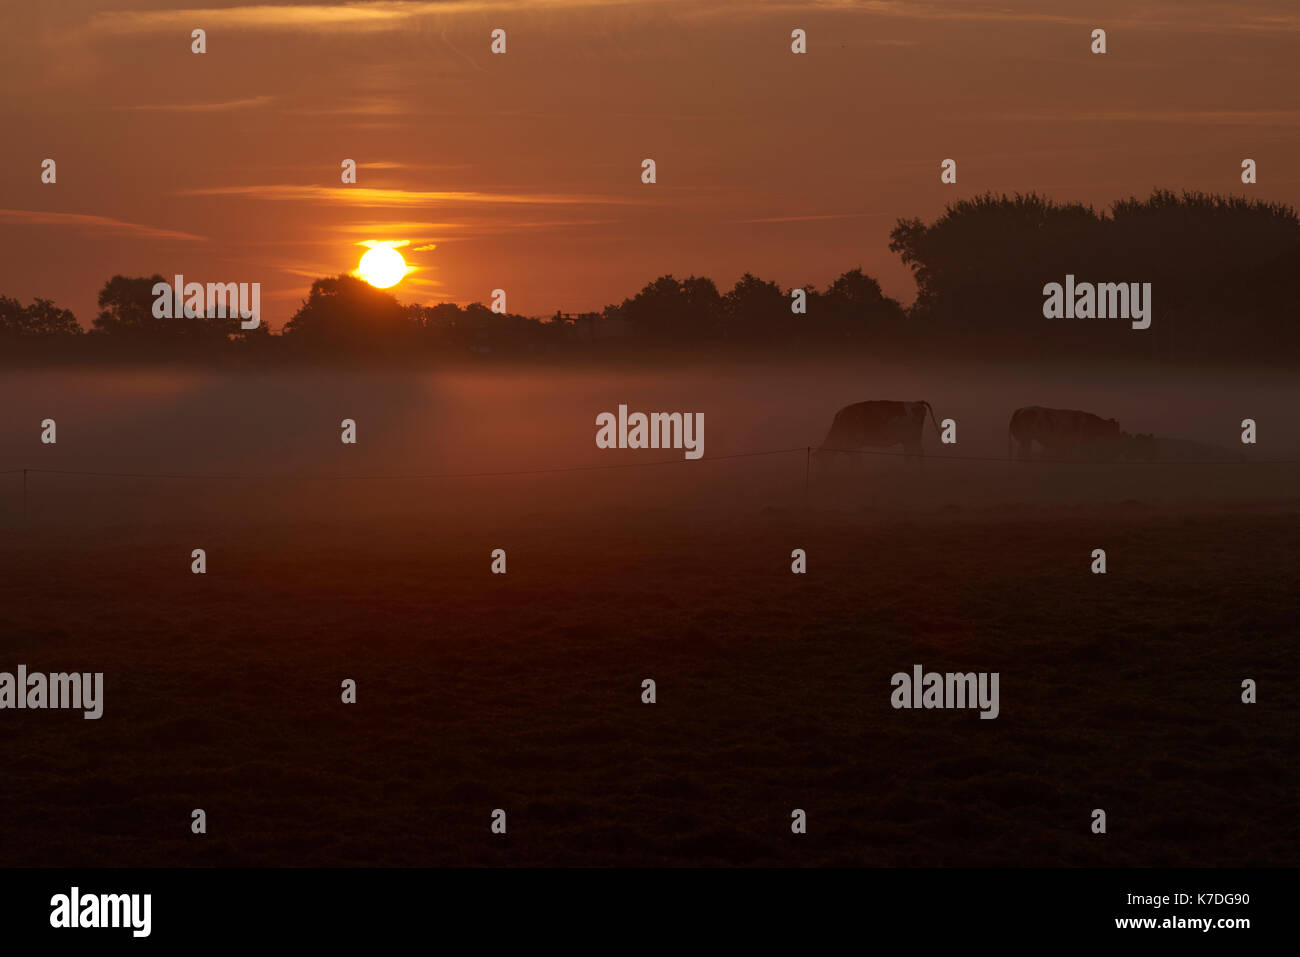 Cows grazing on field against sky during sunrise Stock Photo